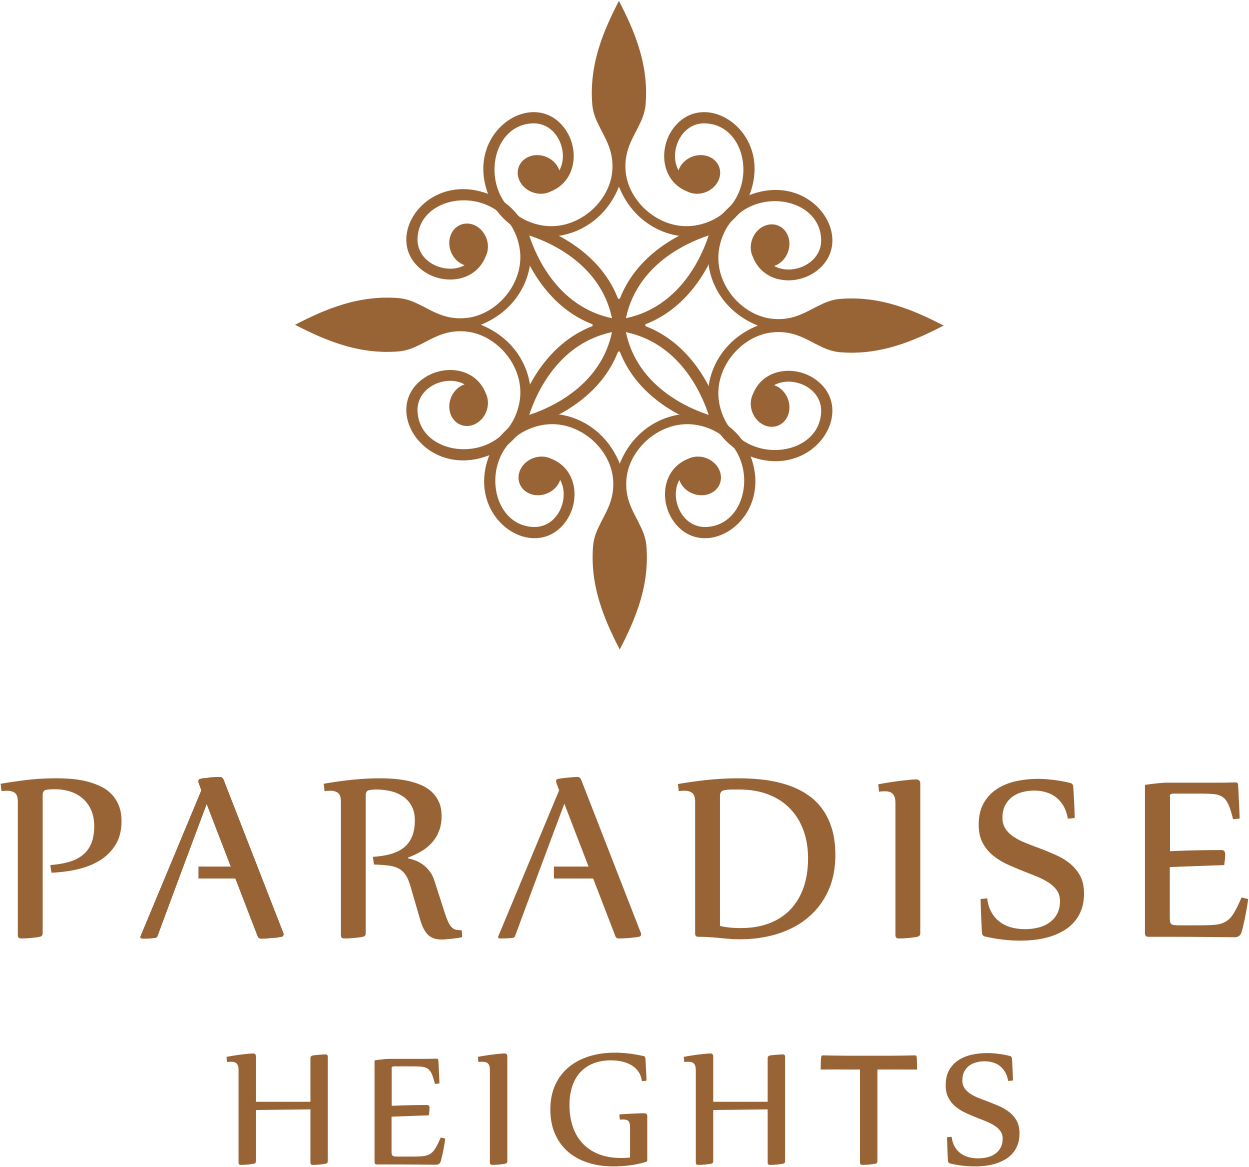 Paradise Heights is a rustic desert setting